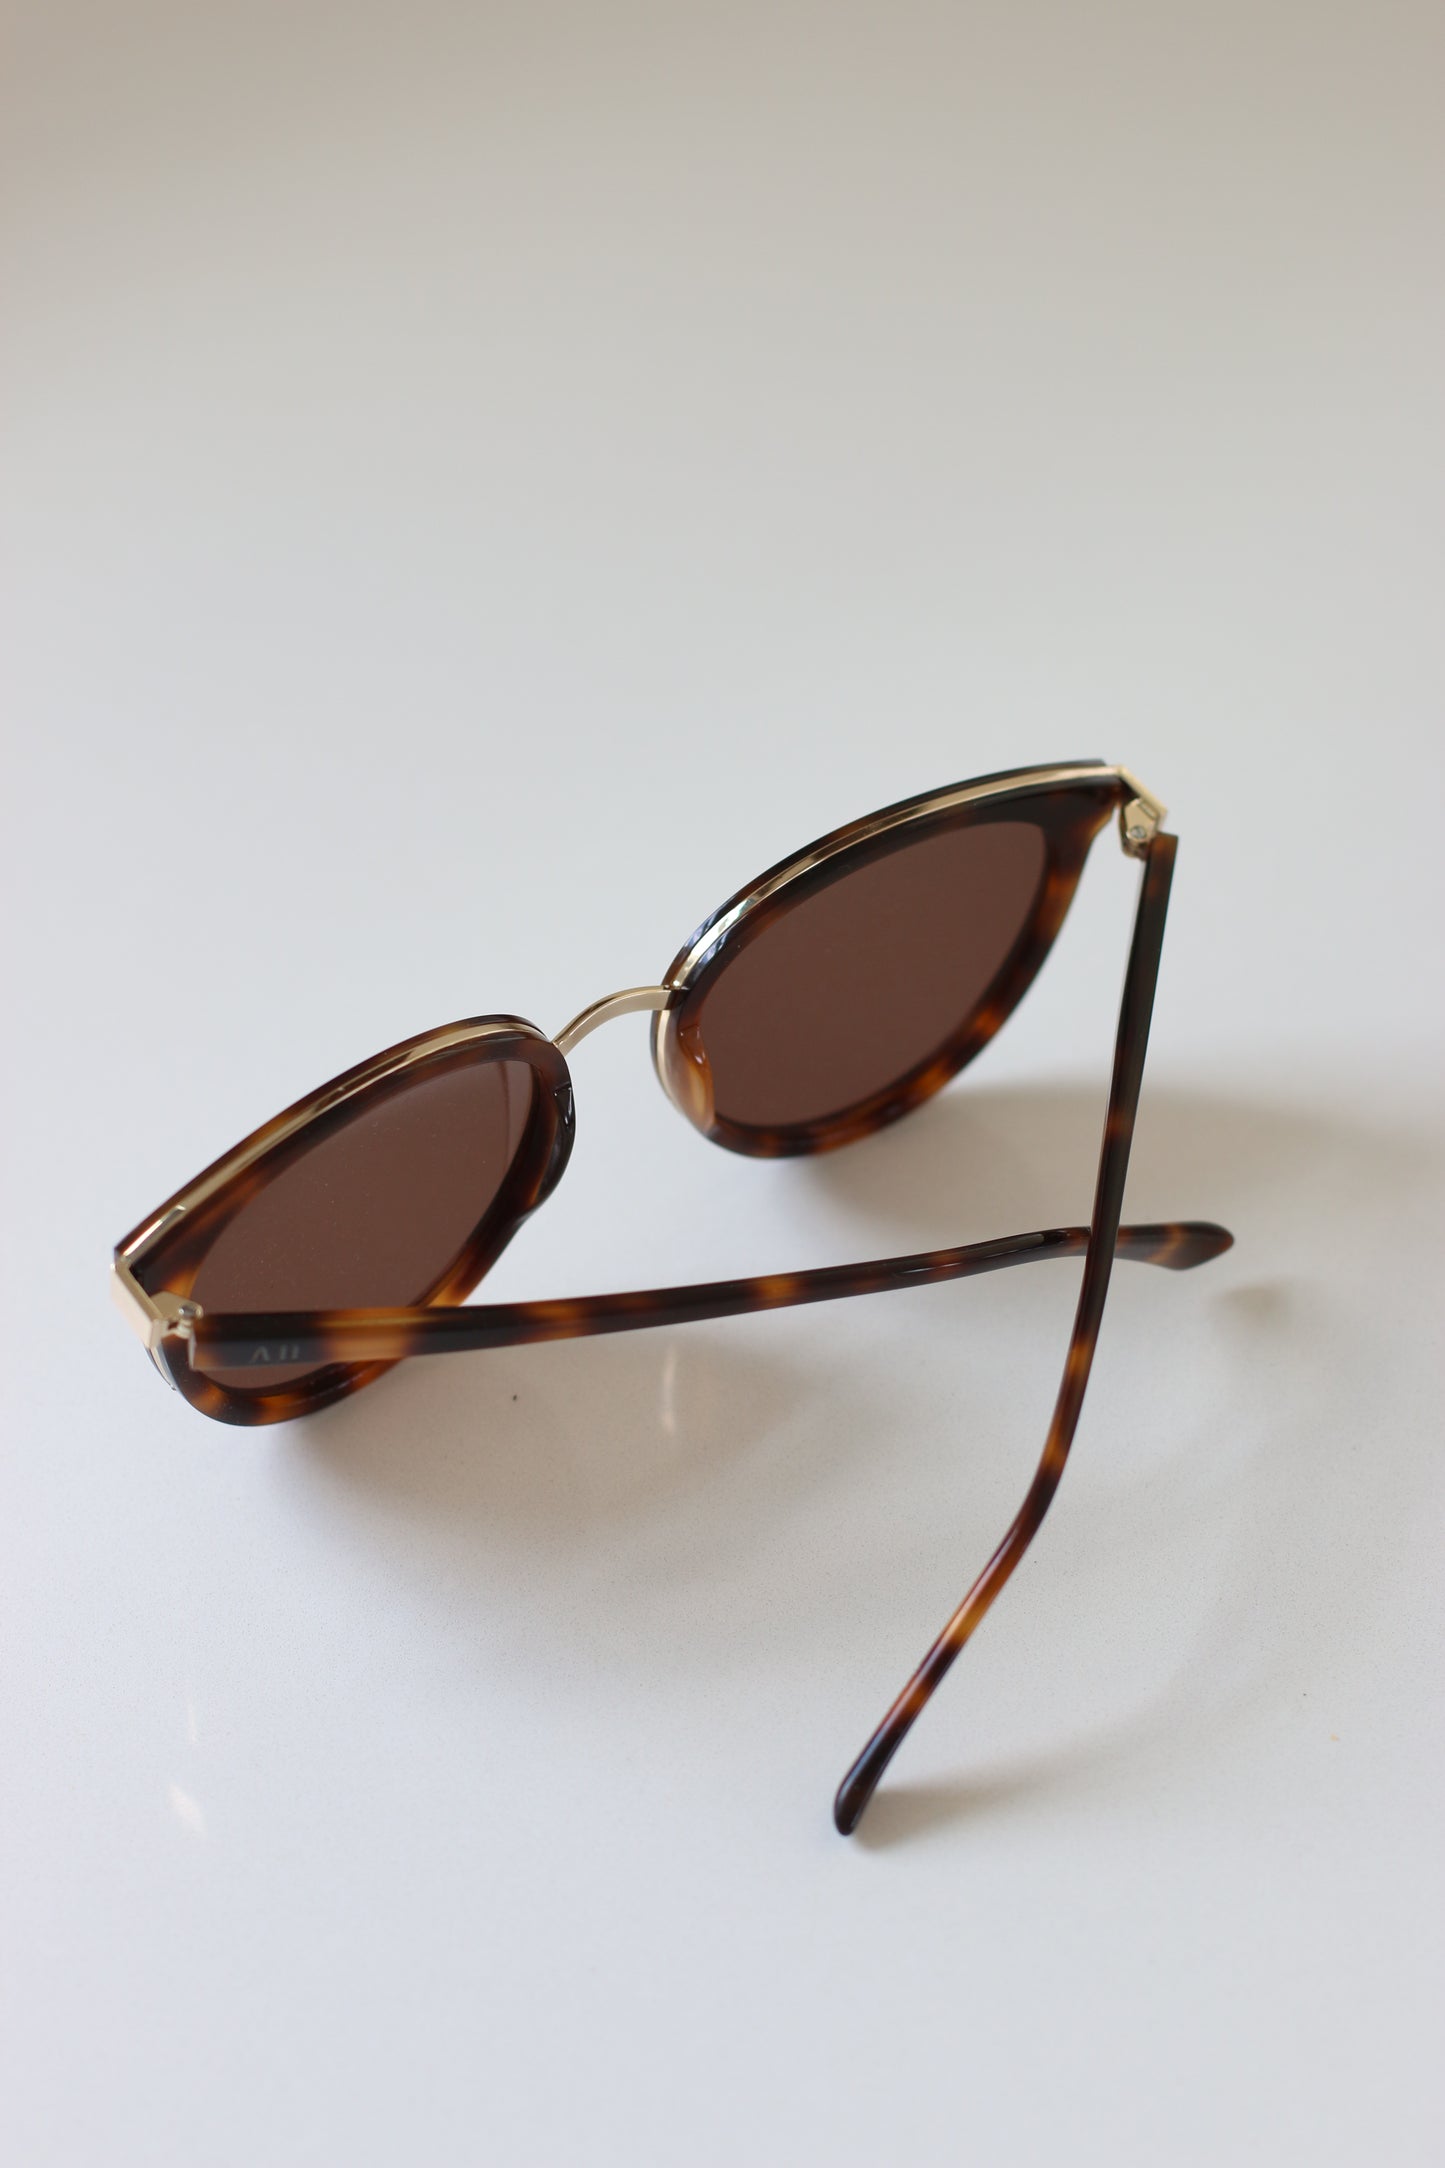 back of sunglasses with Classic and Timeless Frame Design